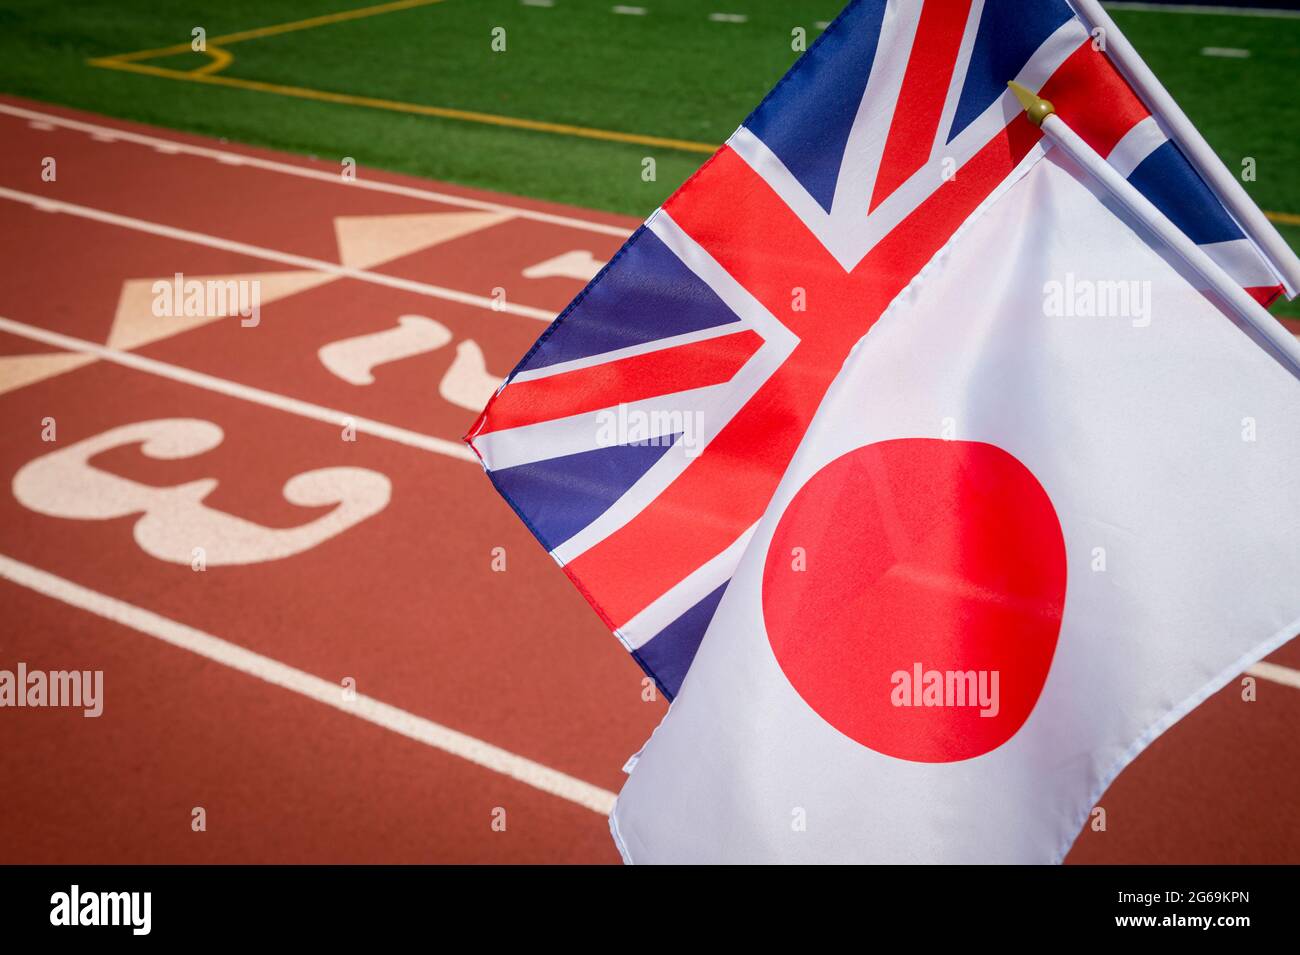 Bright sunny view of UK Union Jack and Japanese flags flying together in front of the numbered lanes at the starting line of a red running track Stock Photo